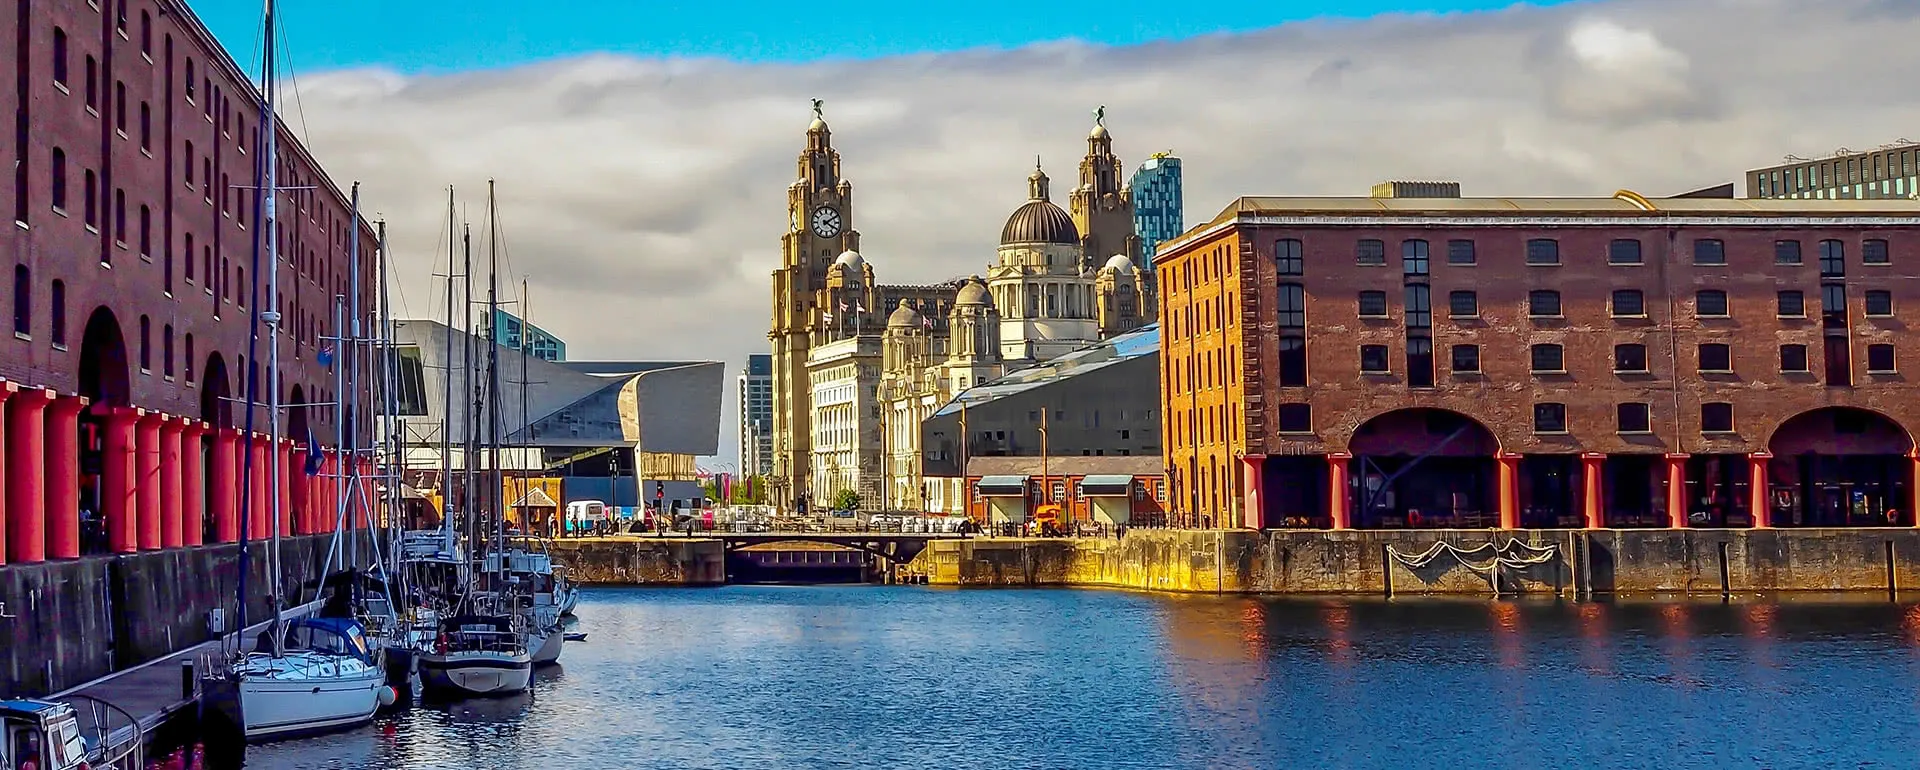 Liverpool - the destination for workers